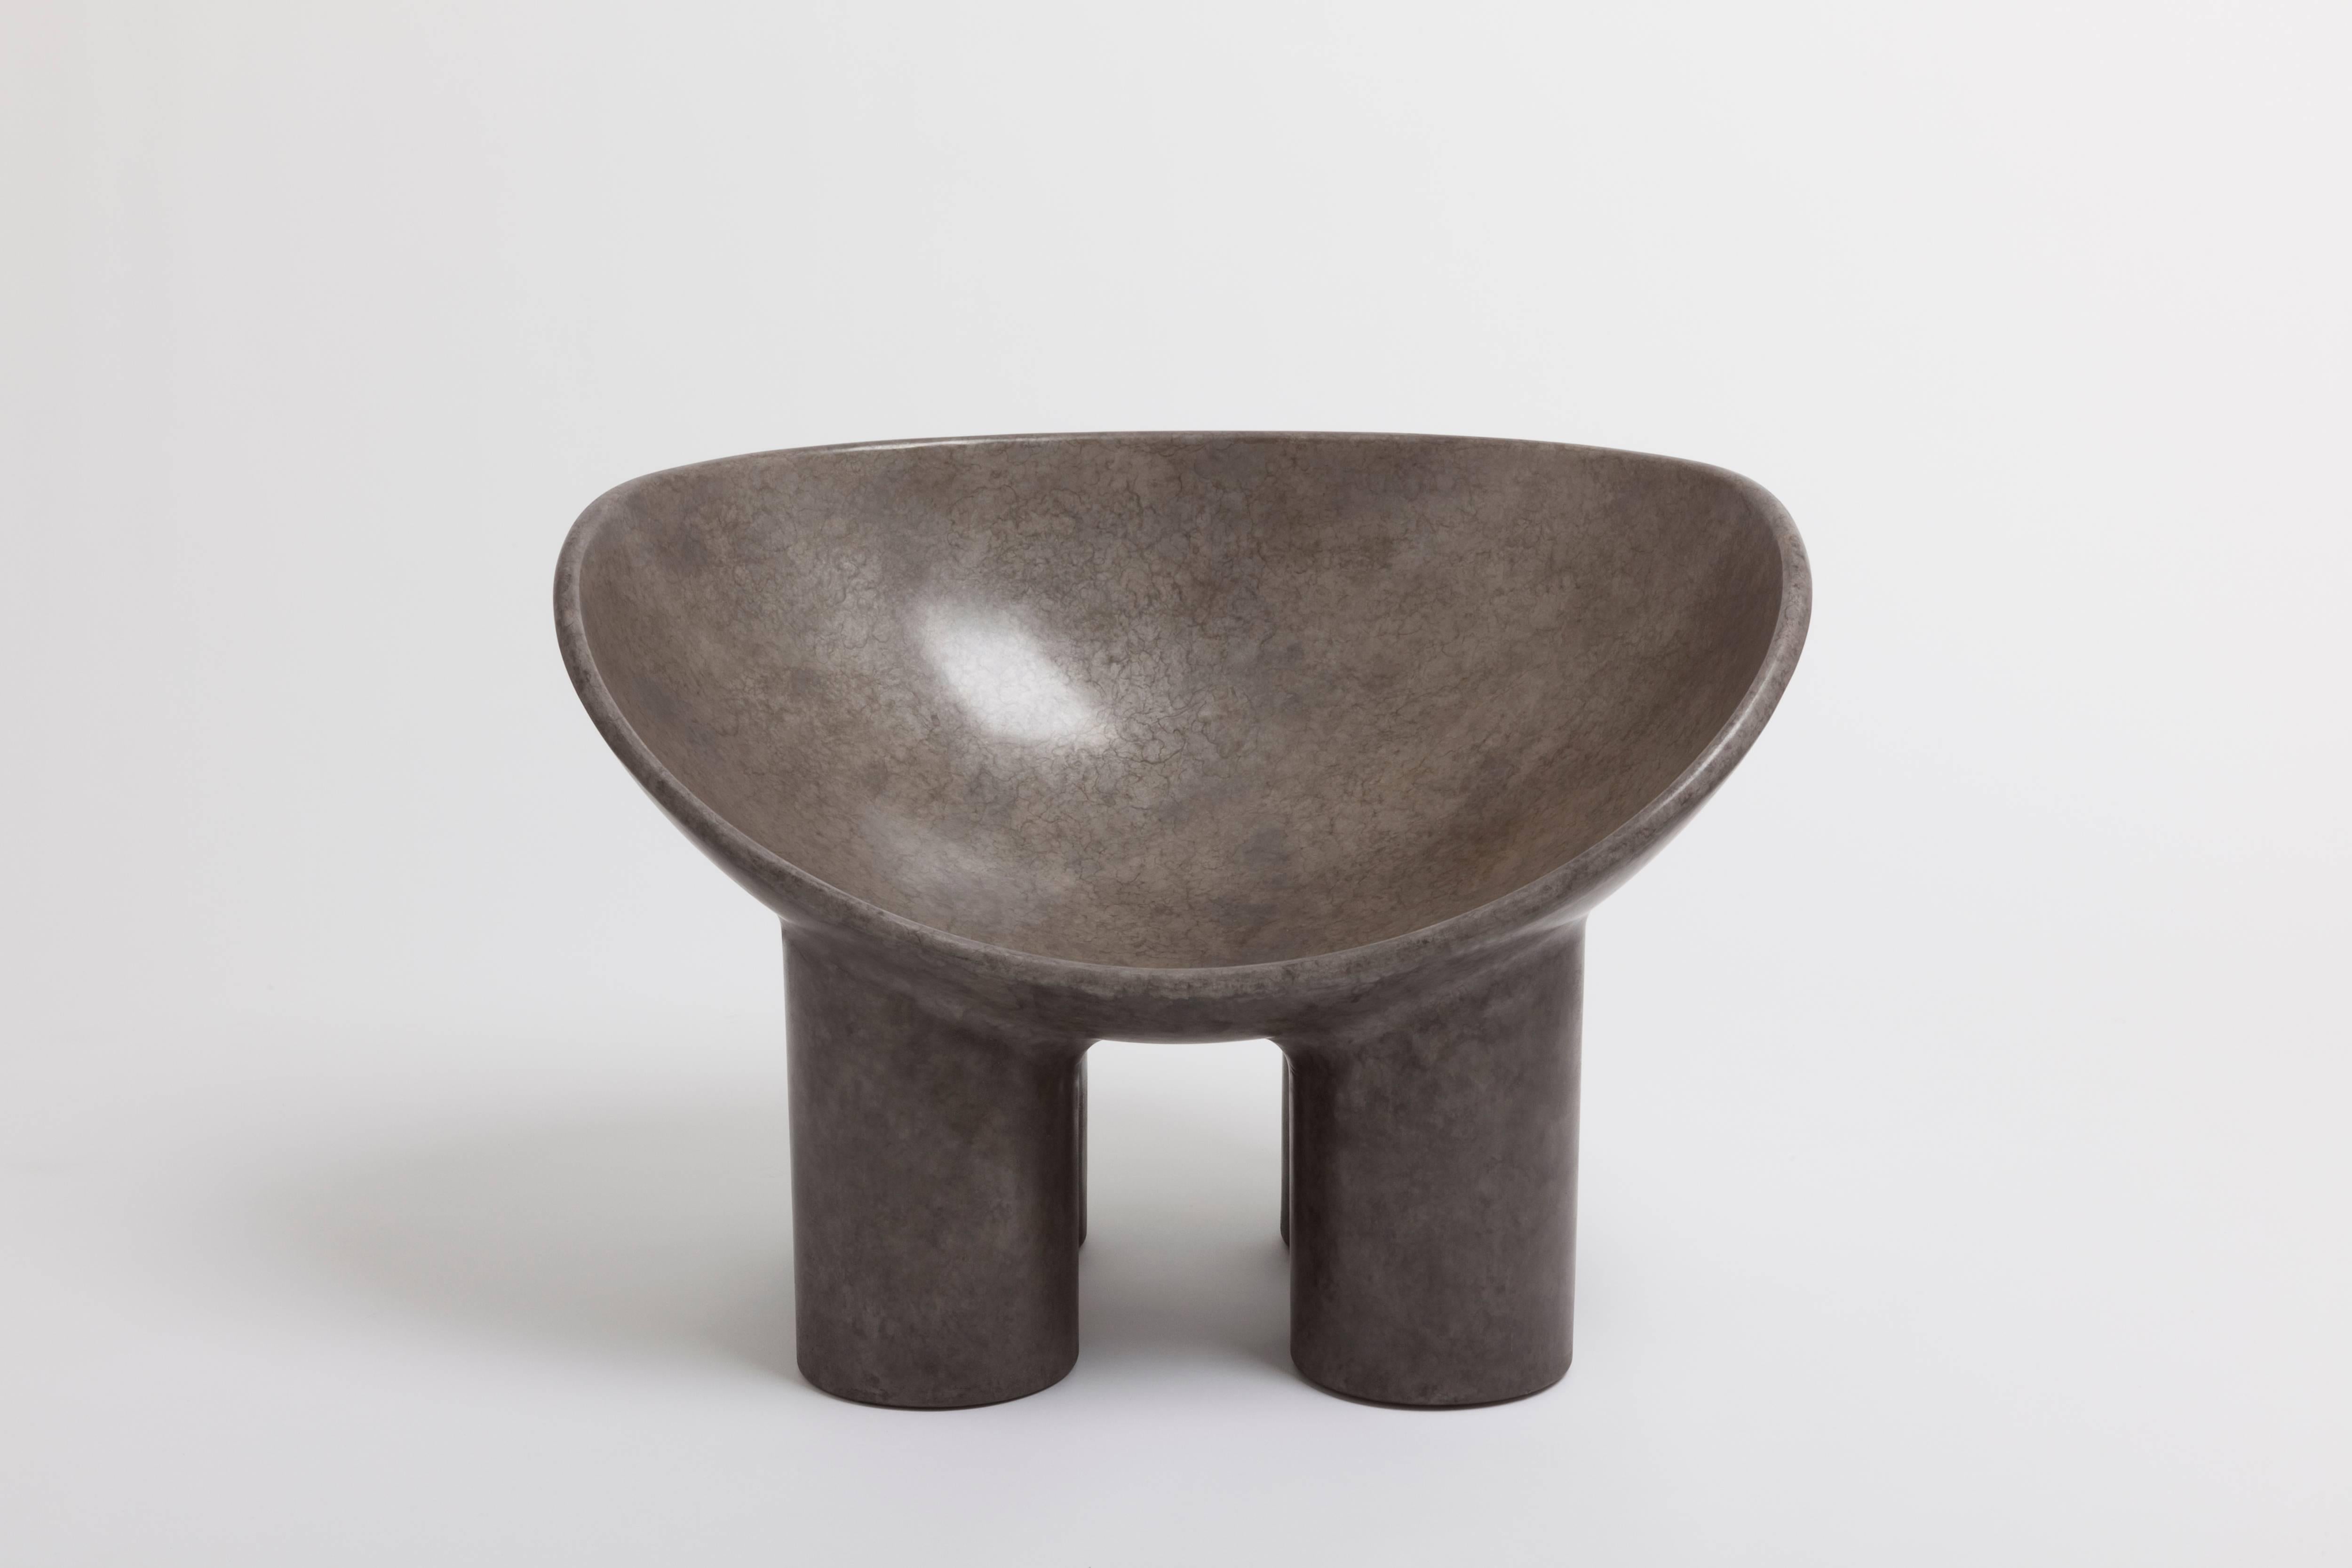 Faye Toogood [British, b. 1977]
Roly-Poly chair / Moon, 2016
Sand-cast bronze, silver nitrate
Measures: 24 x 25 x 33.5 inches
61 x 63.5 x 85 cm